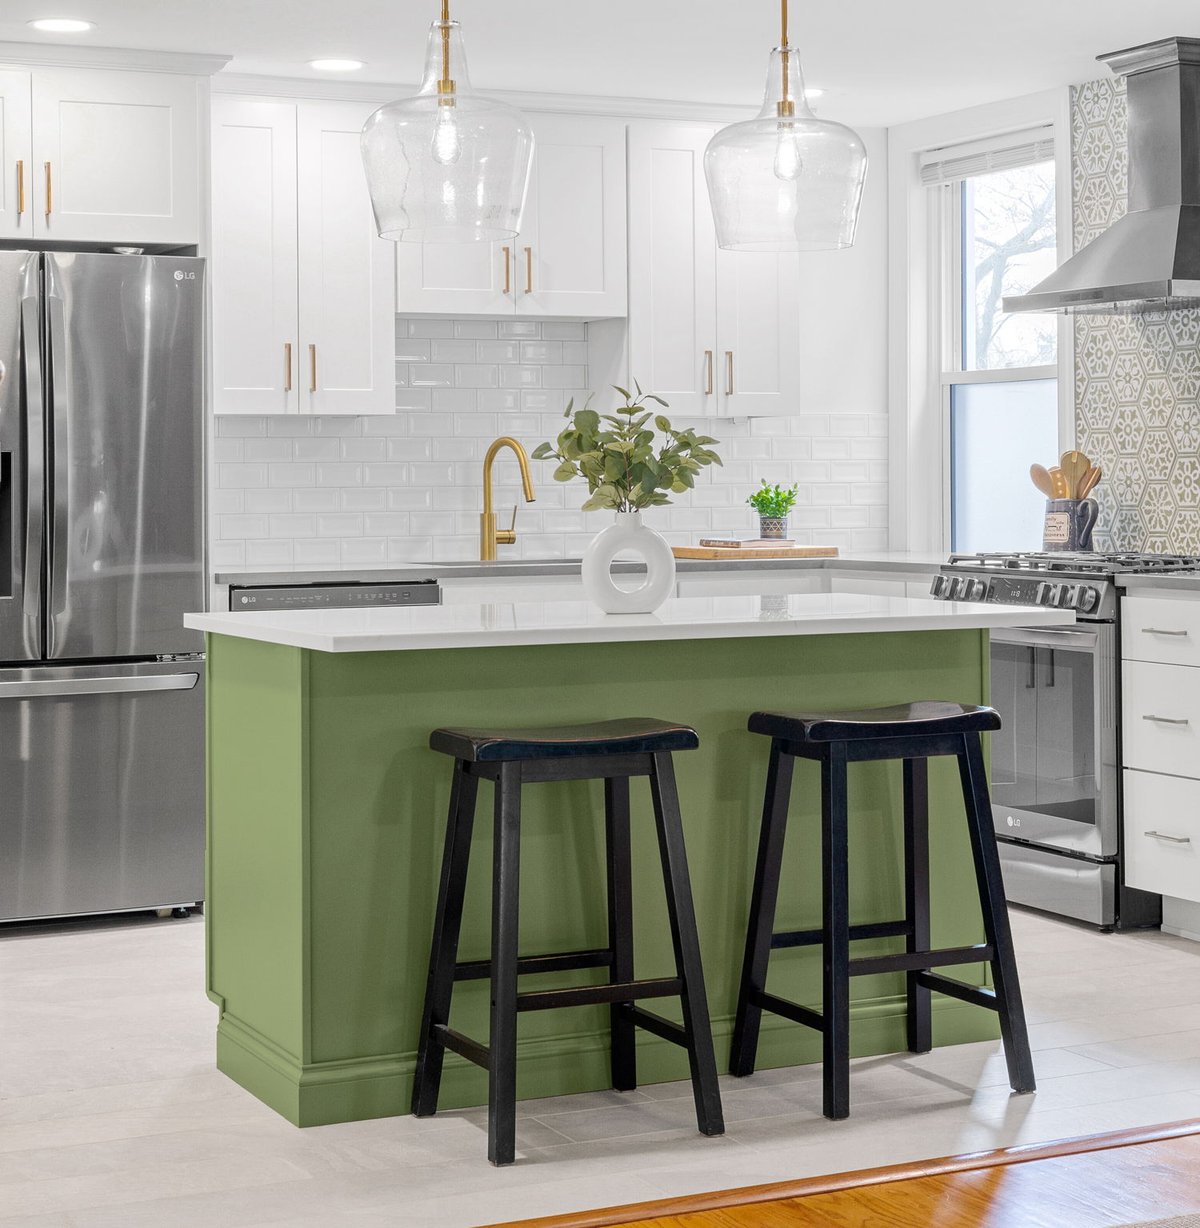 Kitchen island with green base and two pendant light fixtures above in high-end kitchen remodel in Wilmington, Delaware